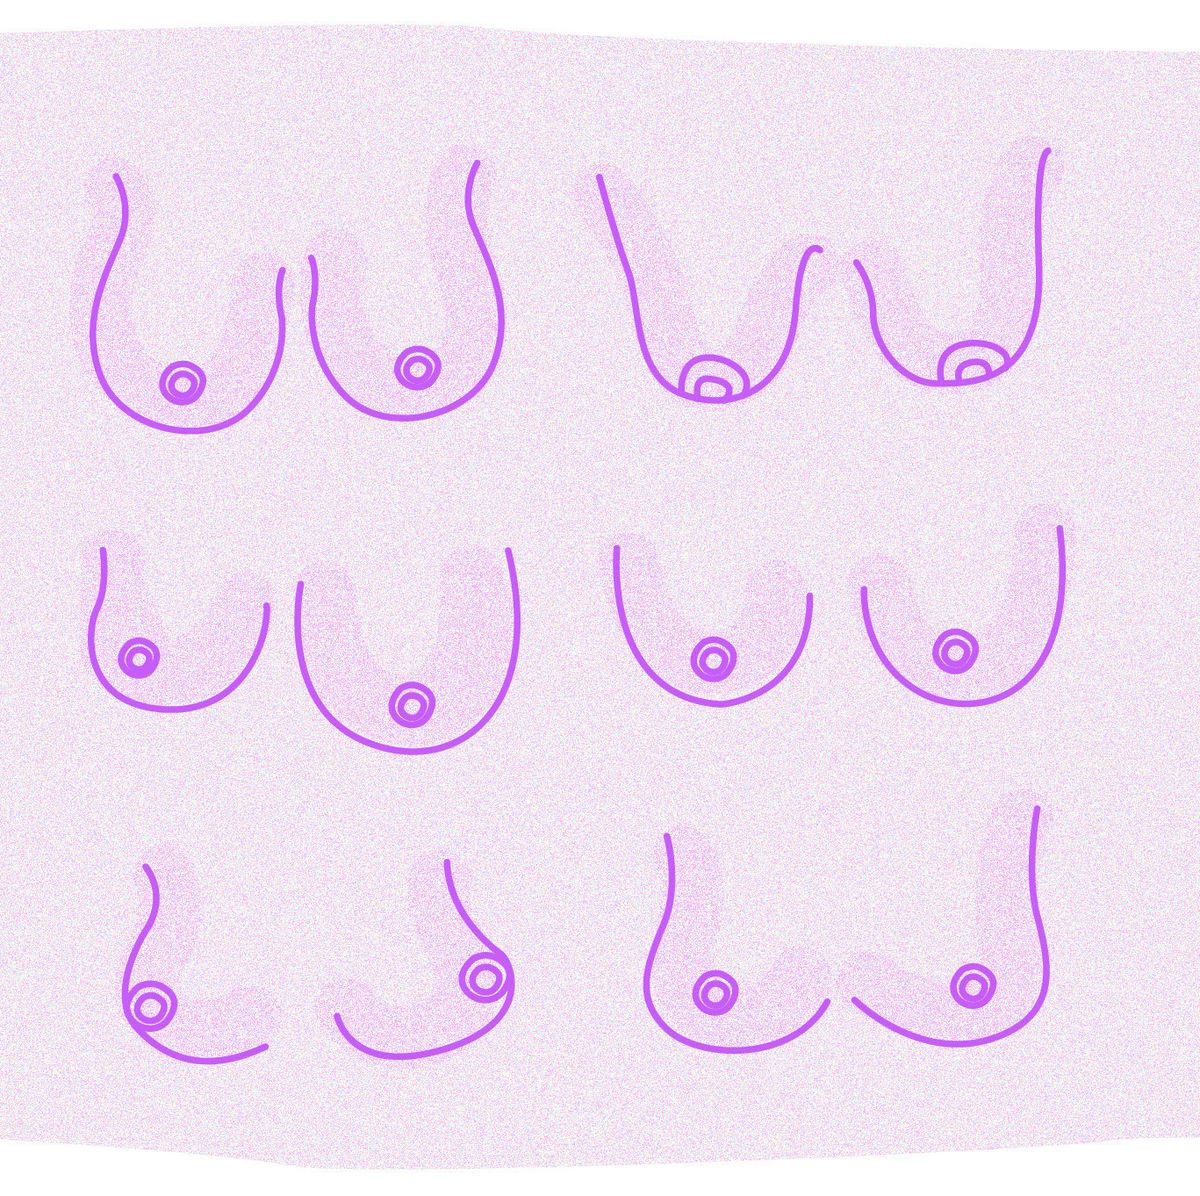 What does it mean if your breasts are top or bottom heavy? How do